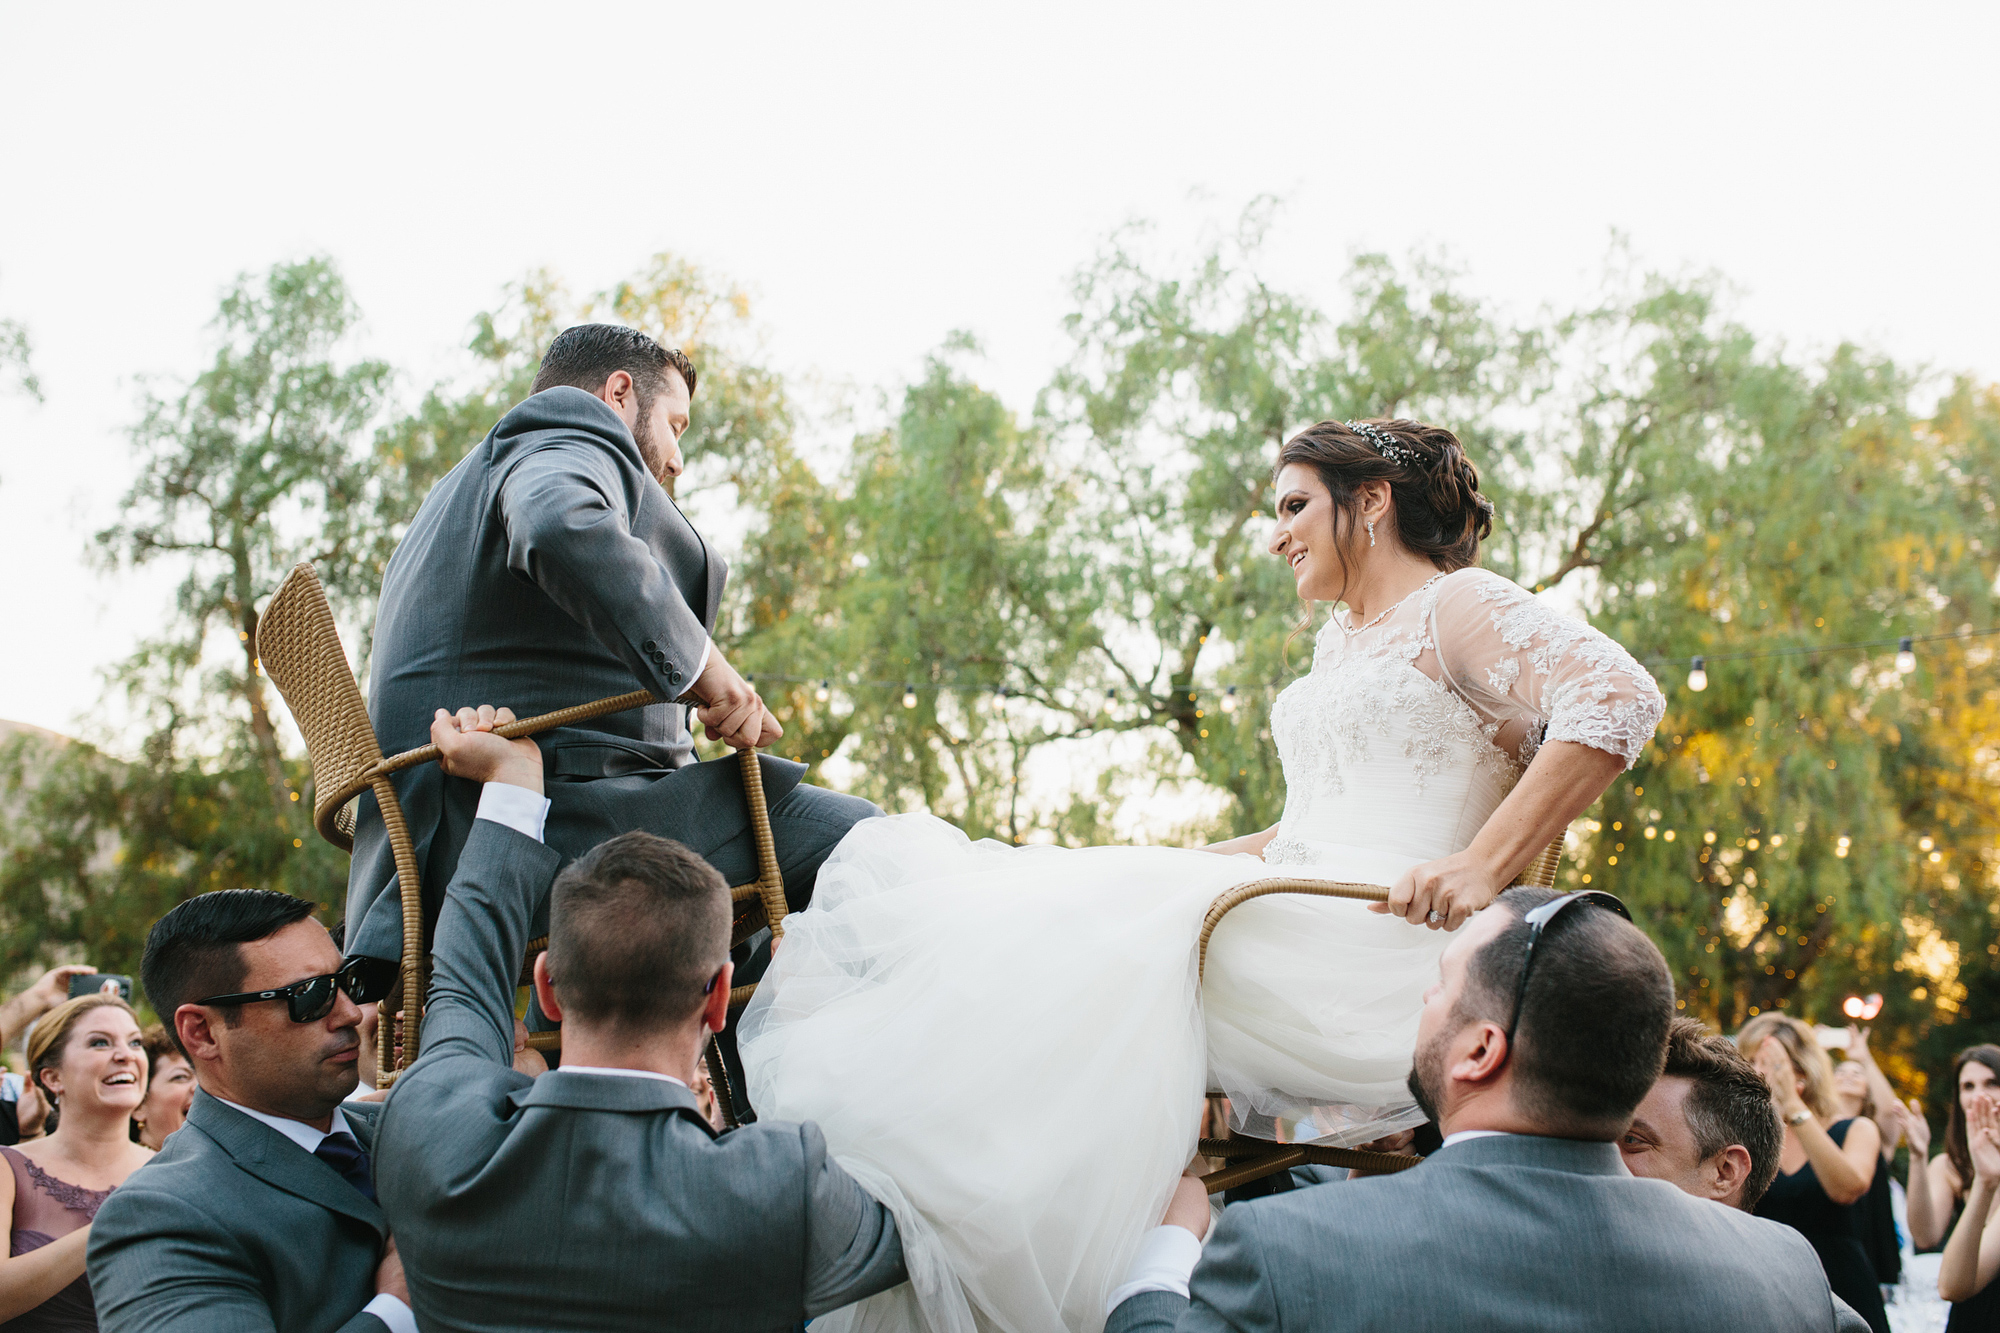 Steven and Samara being lifted on chairs during the hora. 